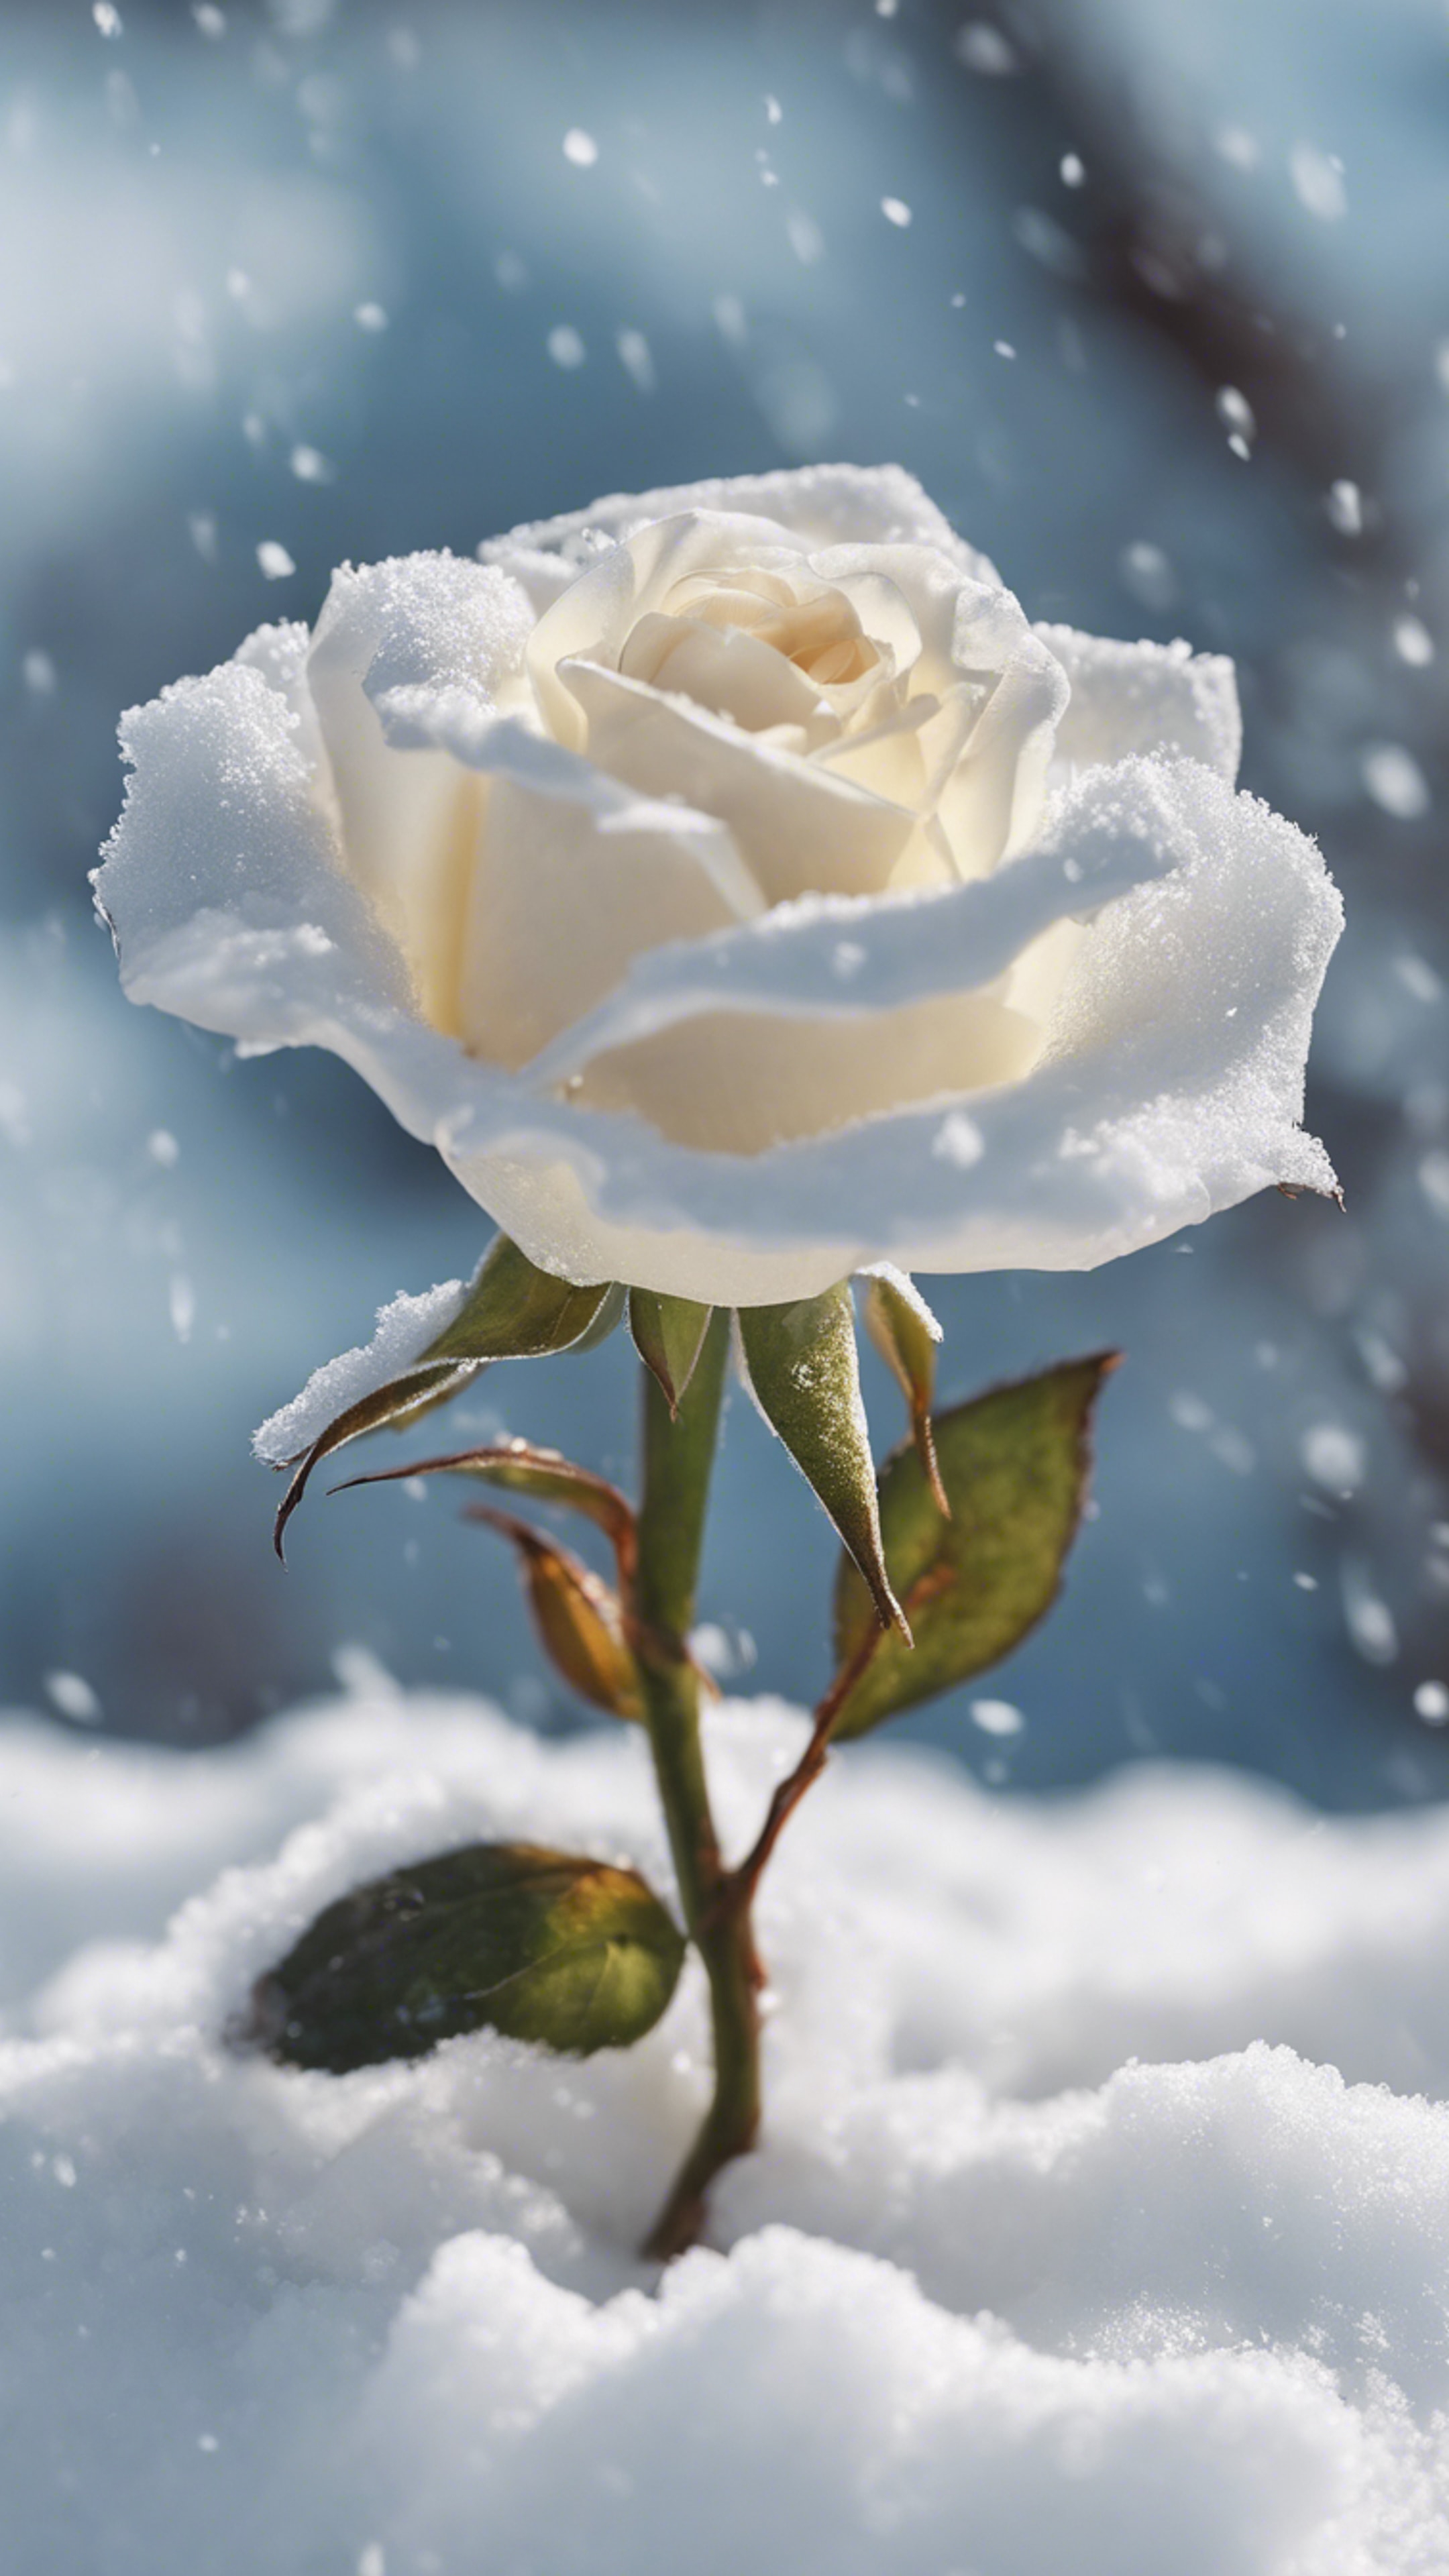 A newly opened white rose sticking out of a snowdrift in early spring. Wallpaper[6918b7c4f5774047824c]